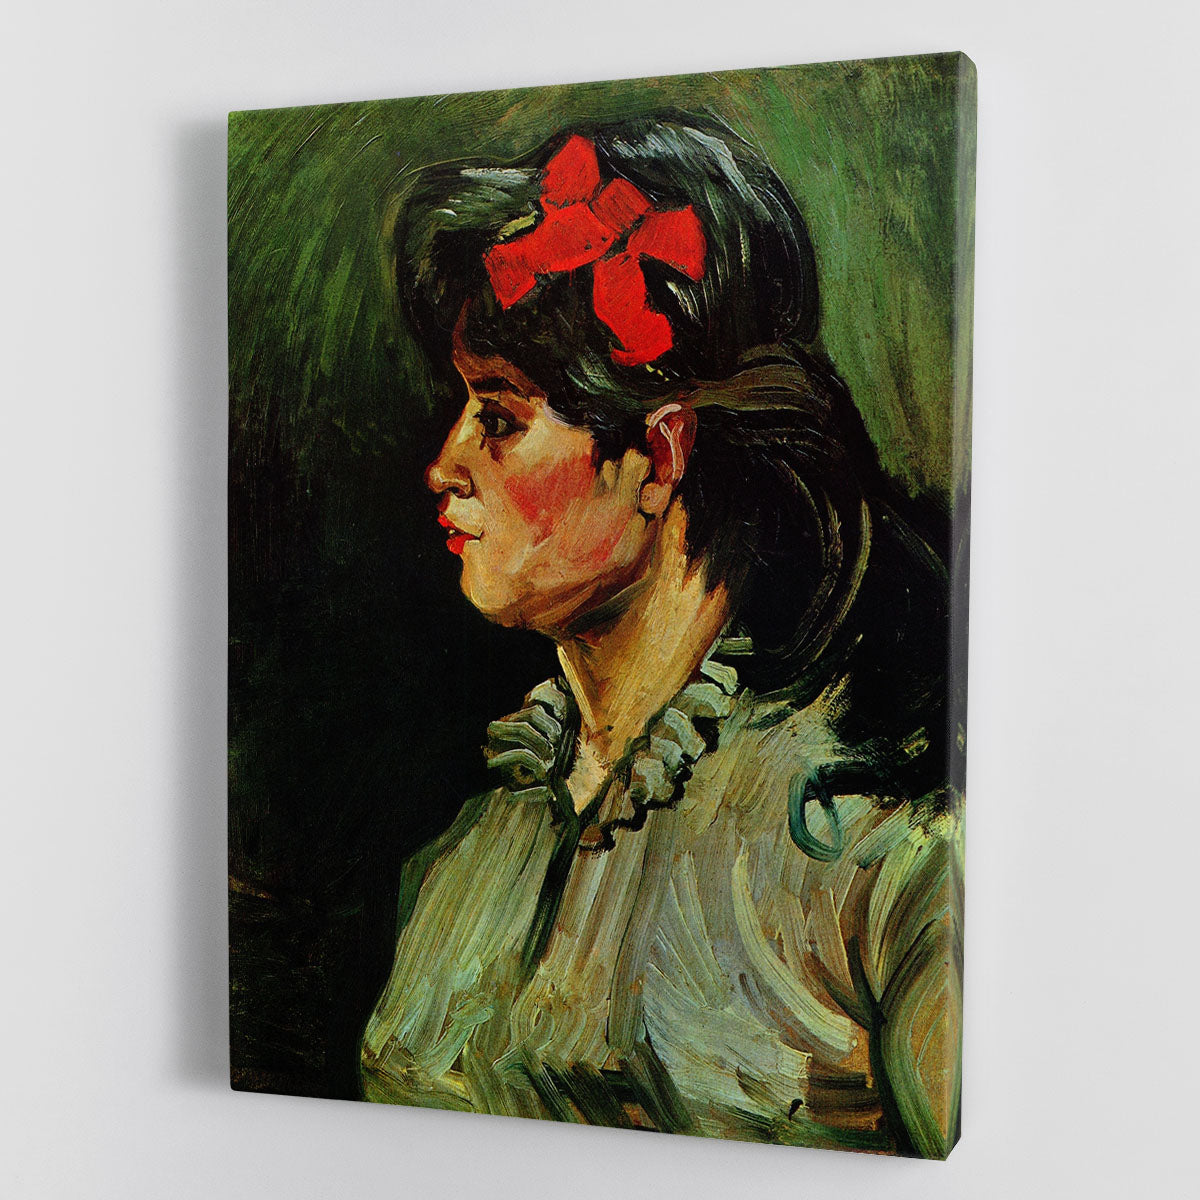 Portrait of a Woman with Red Ribbon by Van Gogh Canvas Print or Poster - Canvas Art Rocks - 1